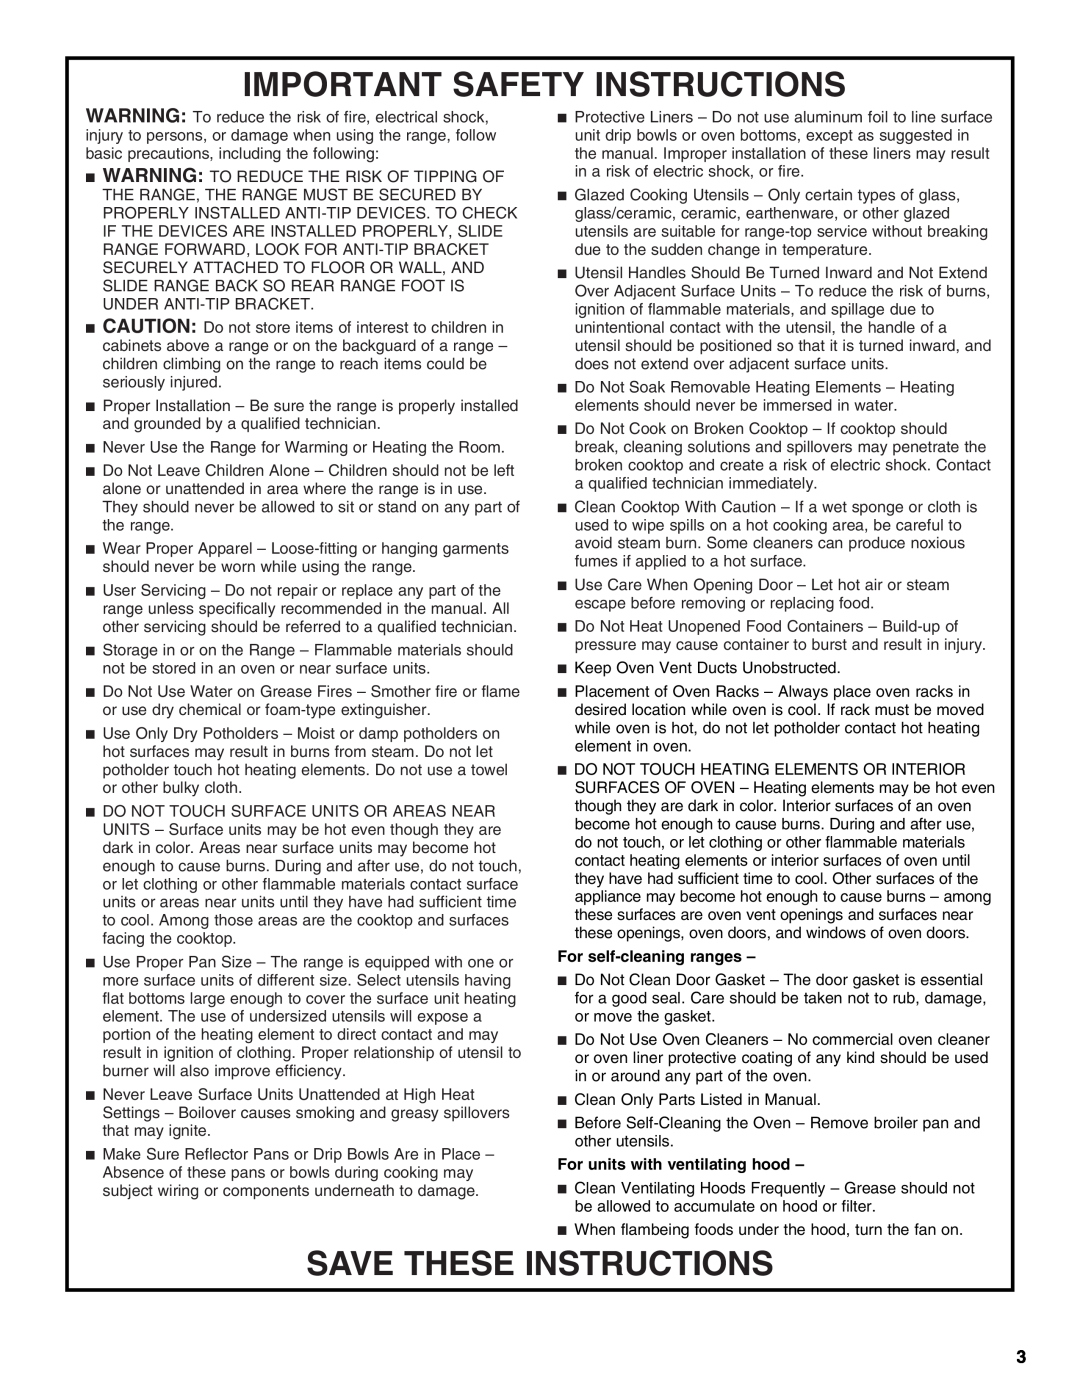 Whirlpool W10392932A warranty Important Safety Instructions, Save These Instructions, For self-cleaning ranges 